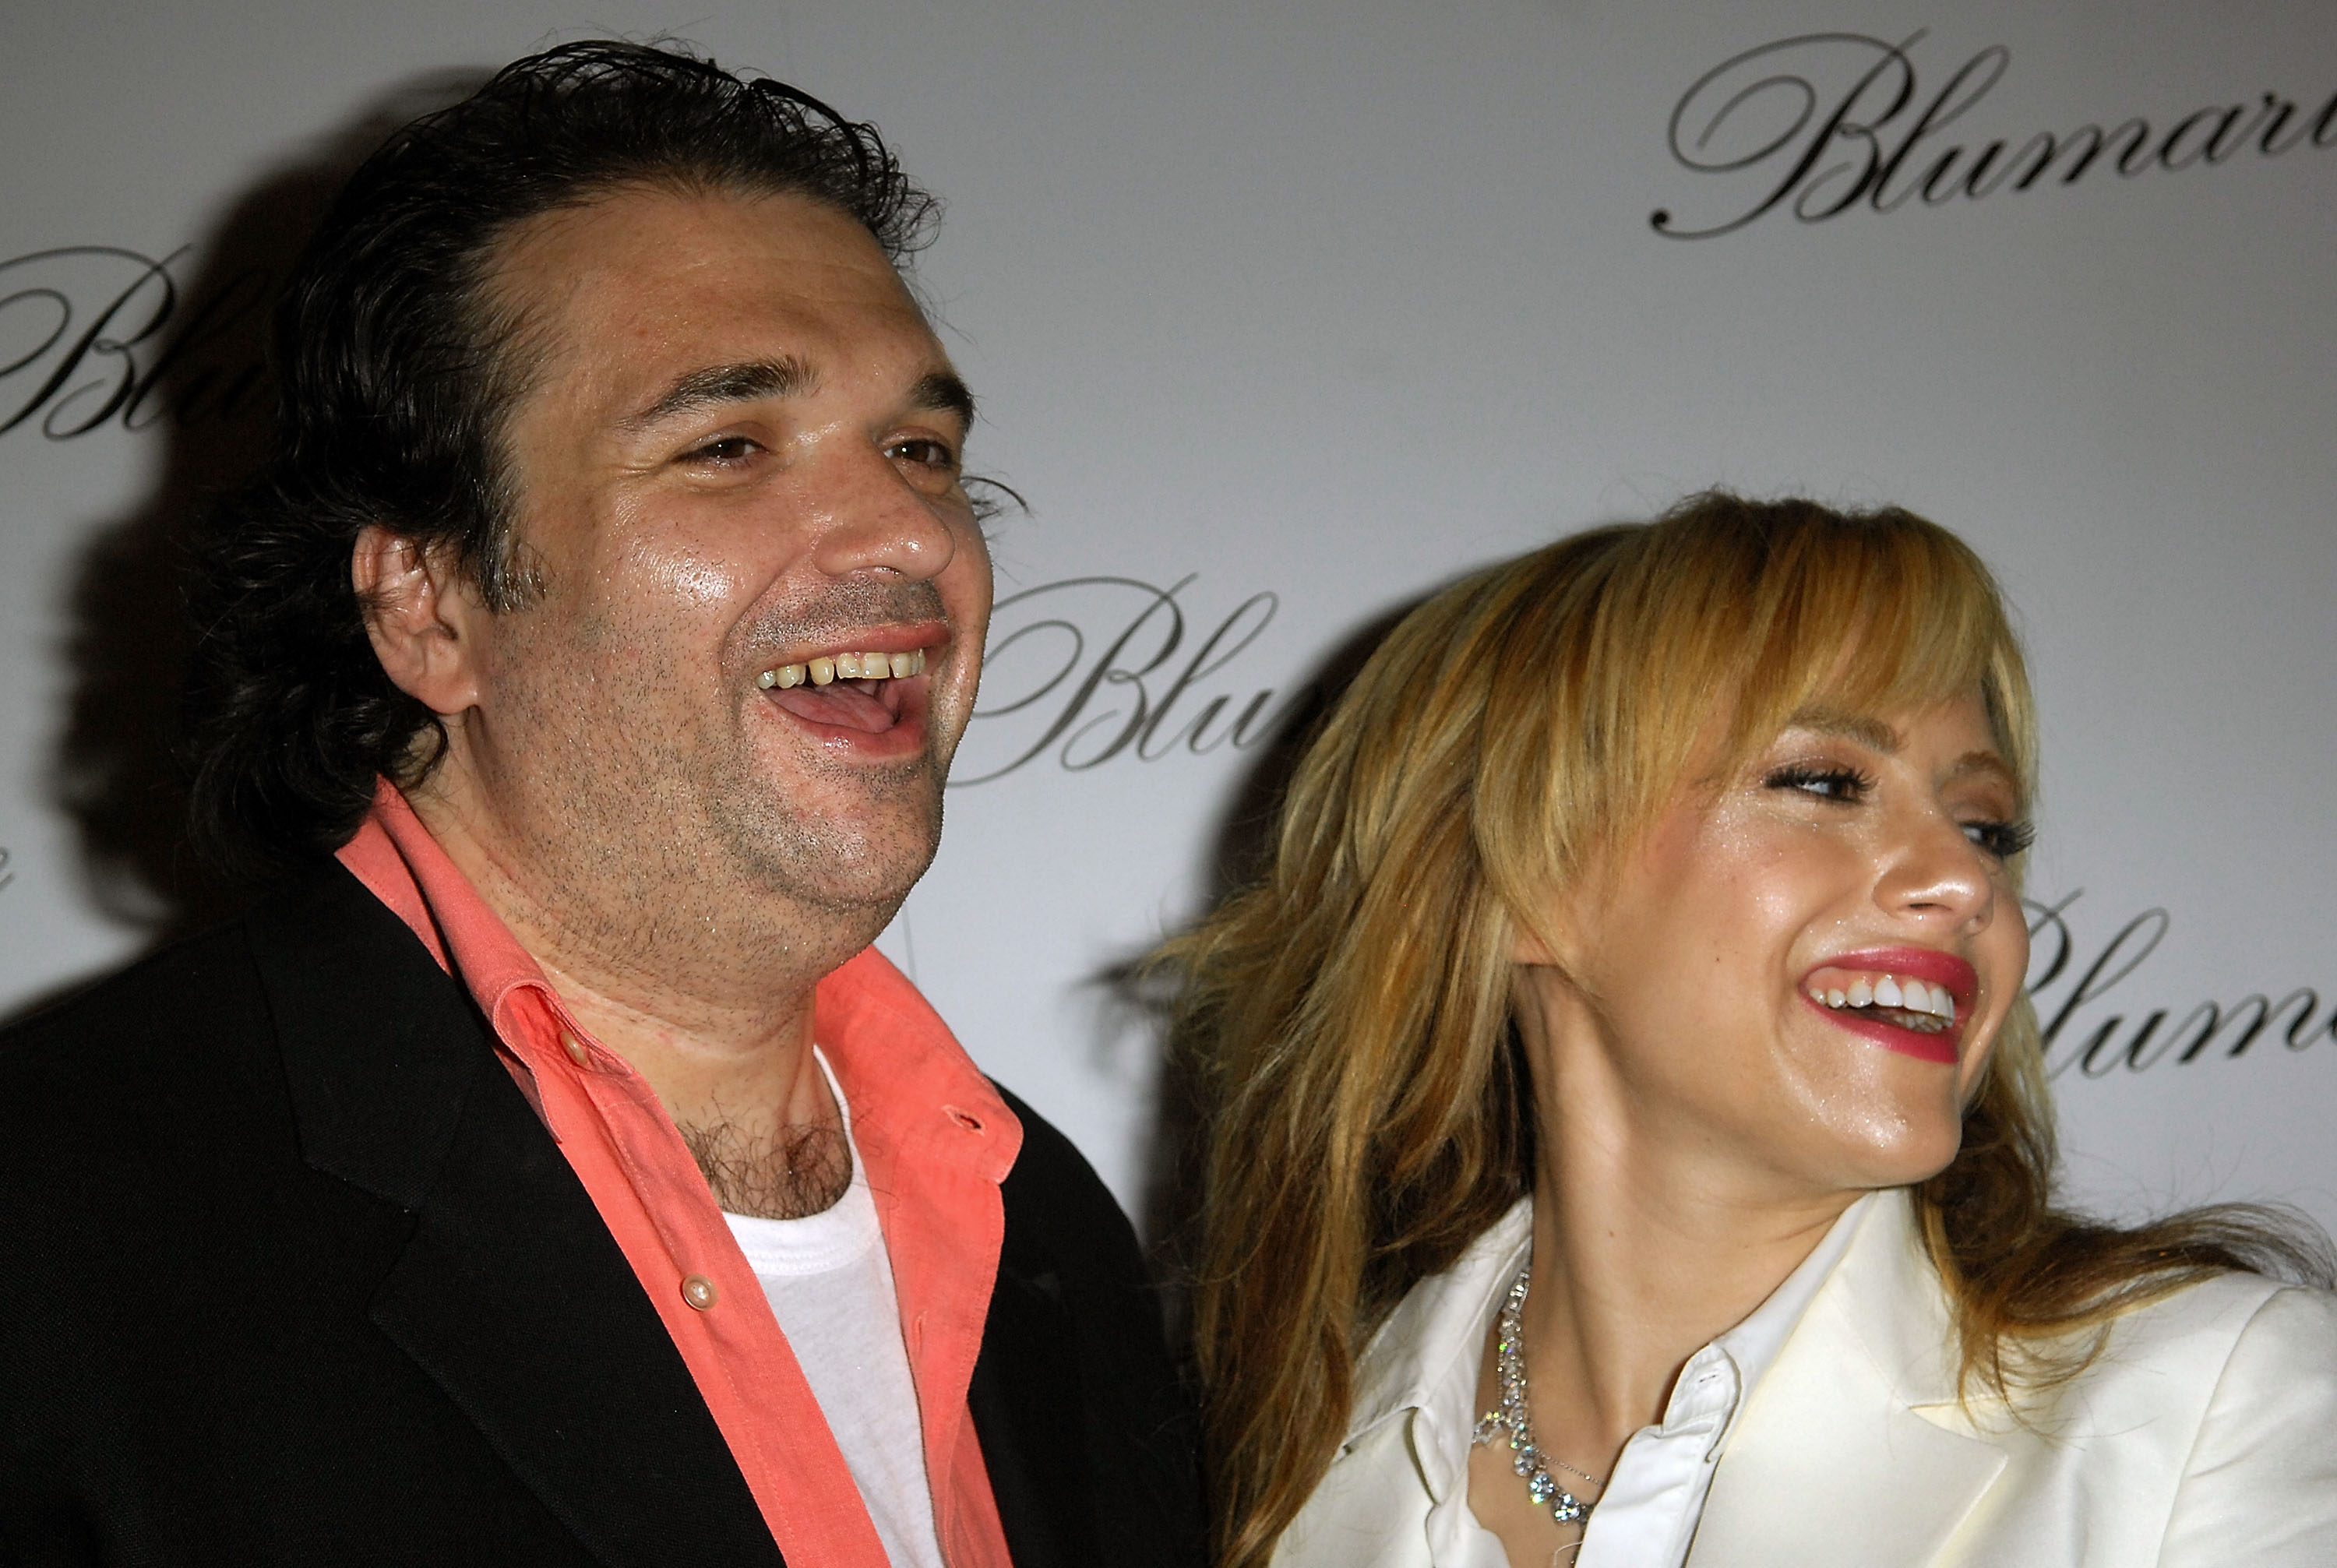 Simon Monjack and Brittany Murphy pose at the opening of the Blumarine US flagship store at the Village of Merrick Park on April 2, 2008 in Coral Gables, Florida. | Source: Getty Images